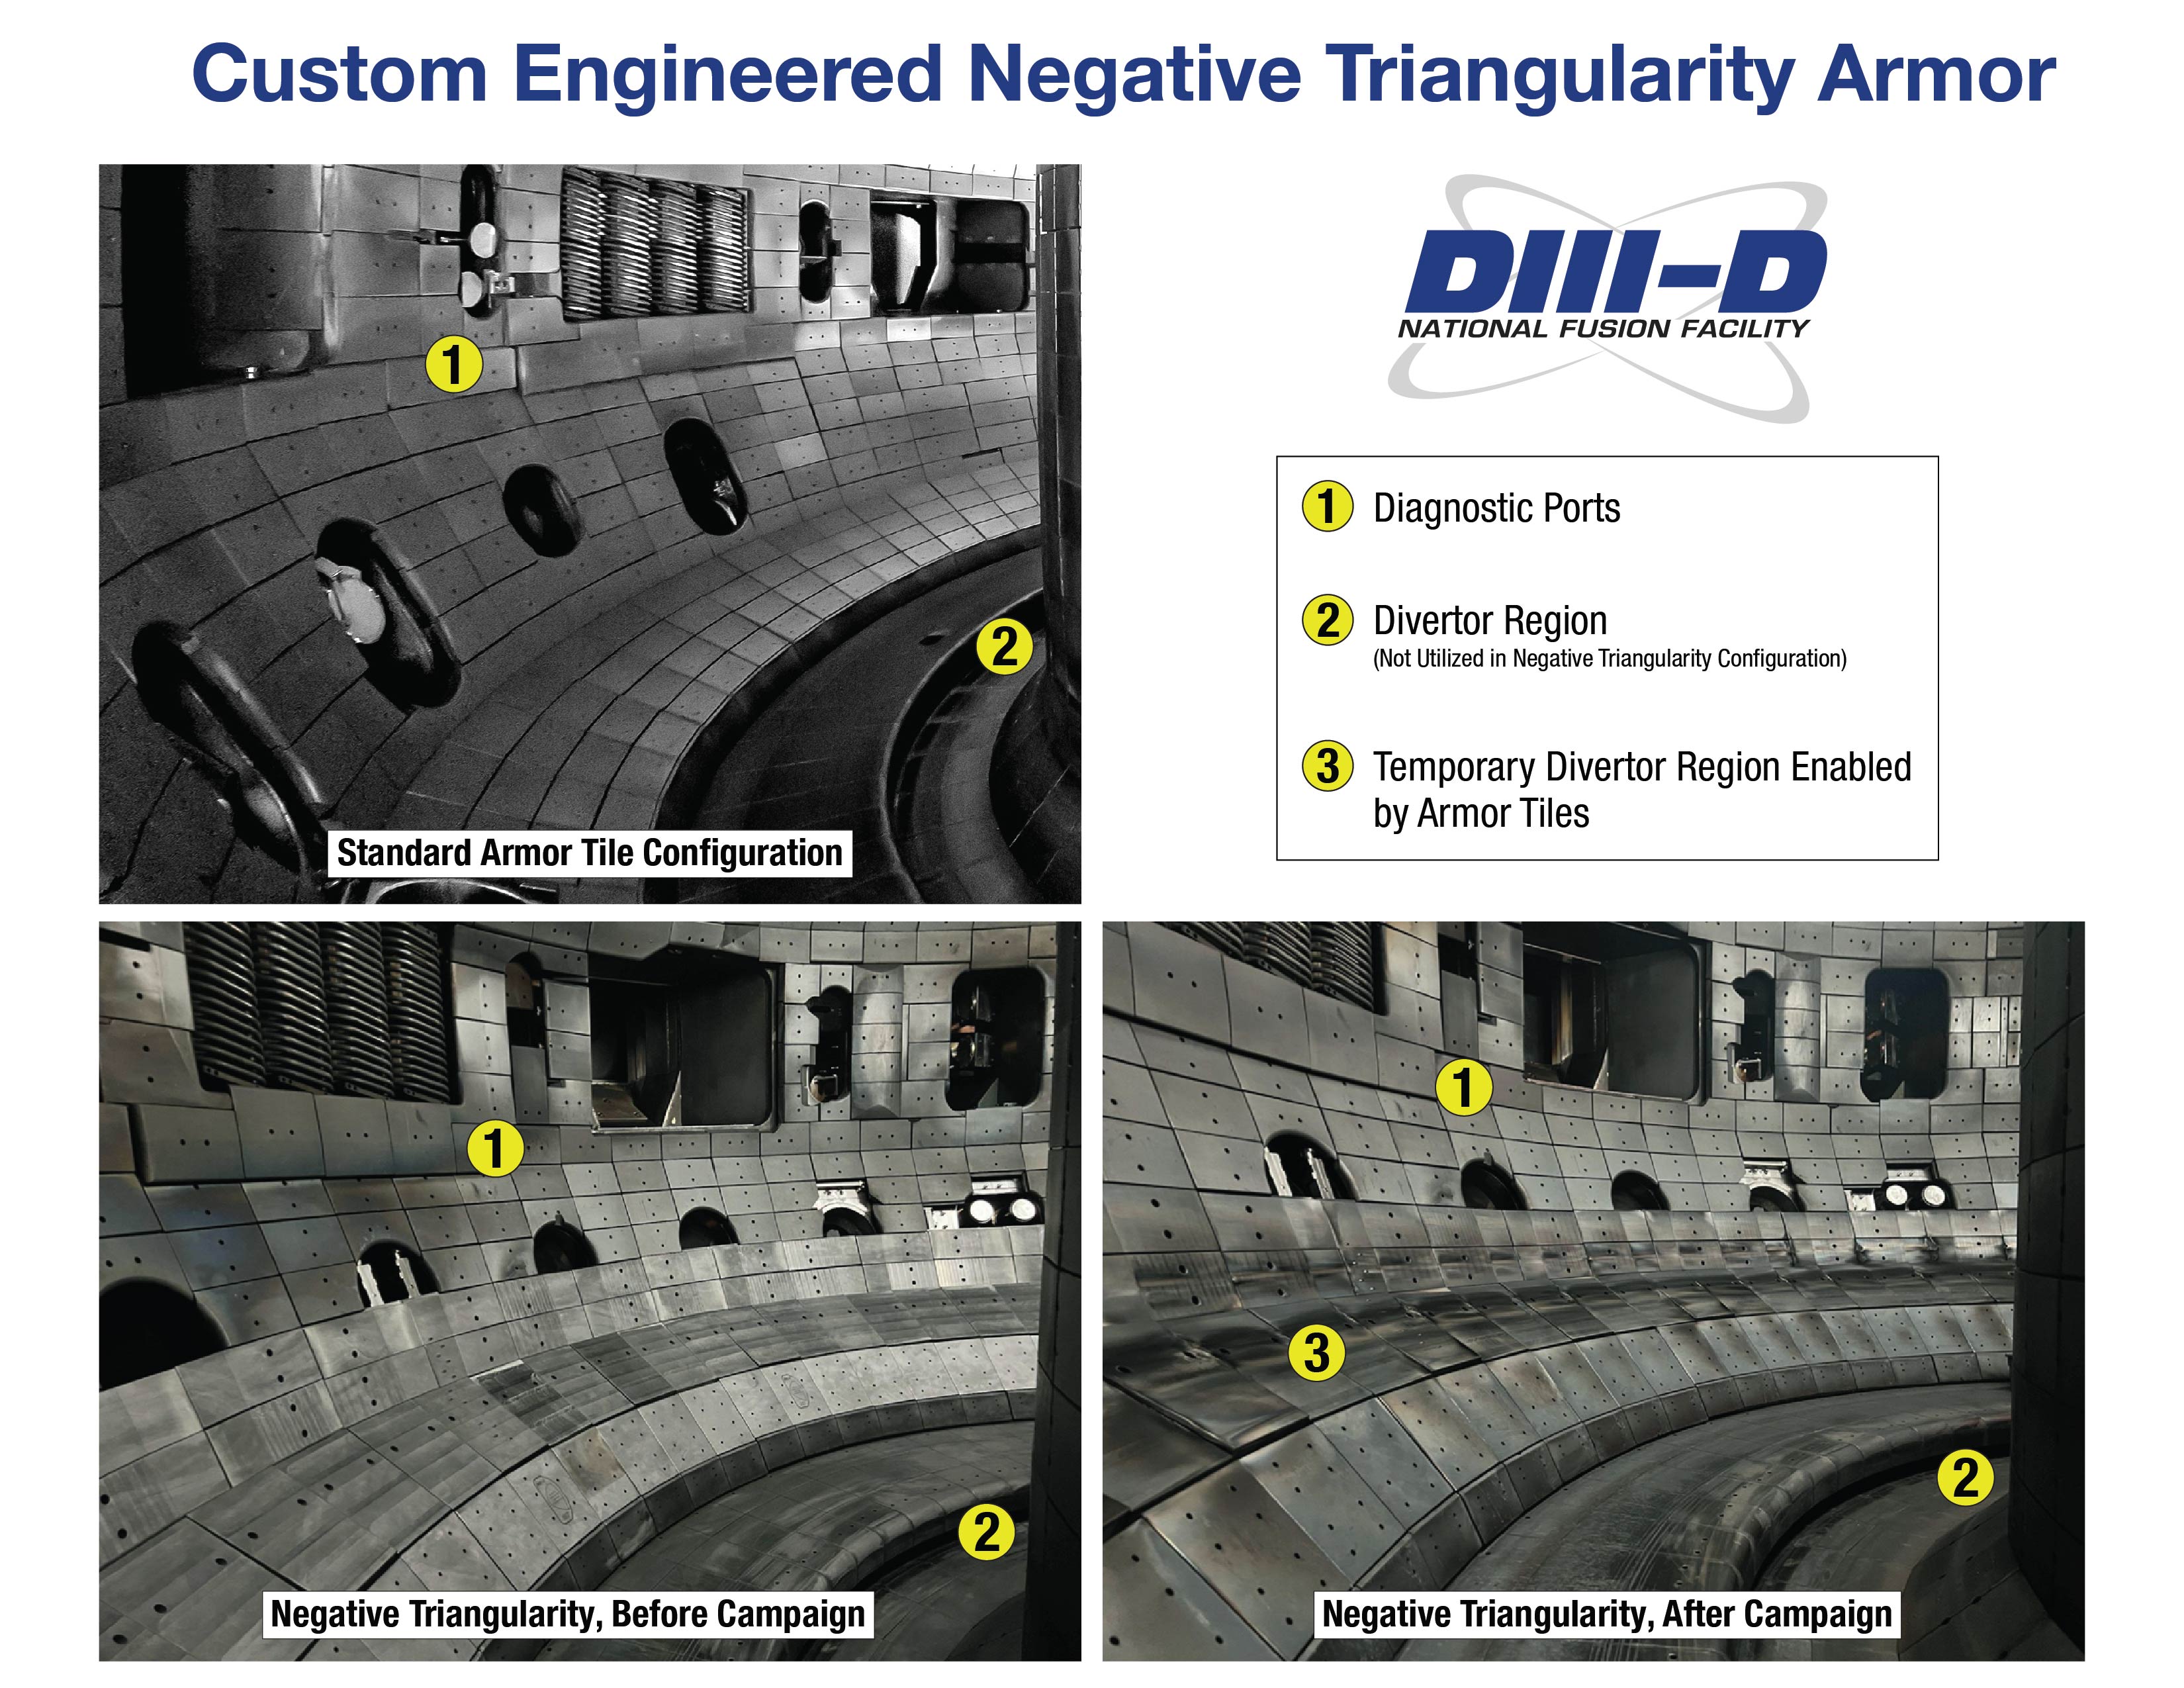 Figure 2: Images of the additional armor tiles installed at the base of the DIII-D tokamak to enable the negative triangularity campaign. The image on the upper left shows the interior of the DIII-D tokamak configured for positive triangularity plasmas. The lower images show the tiles configured for the negative triangularity campaign. The visible discoloration of the armor tiles in the lower right image is due to the intense power exhaust of the plasmas.